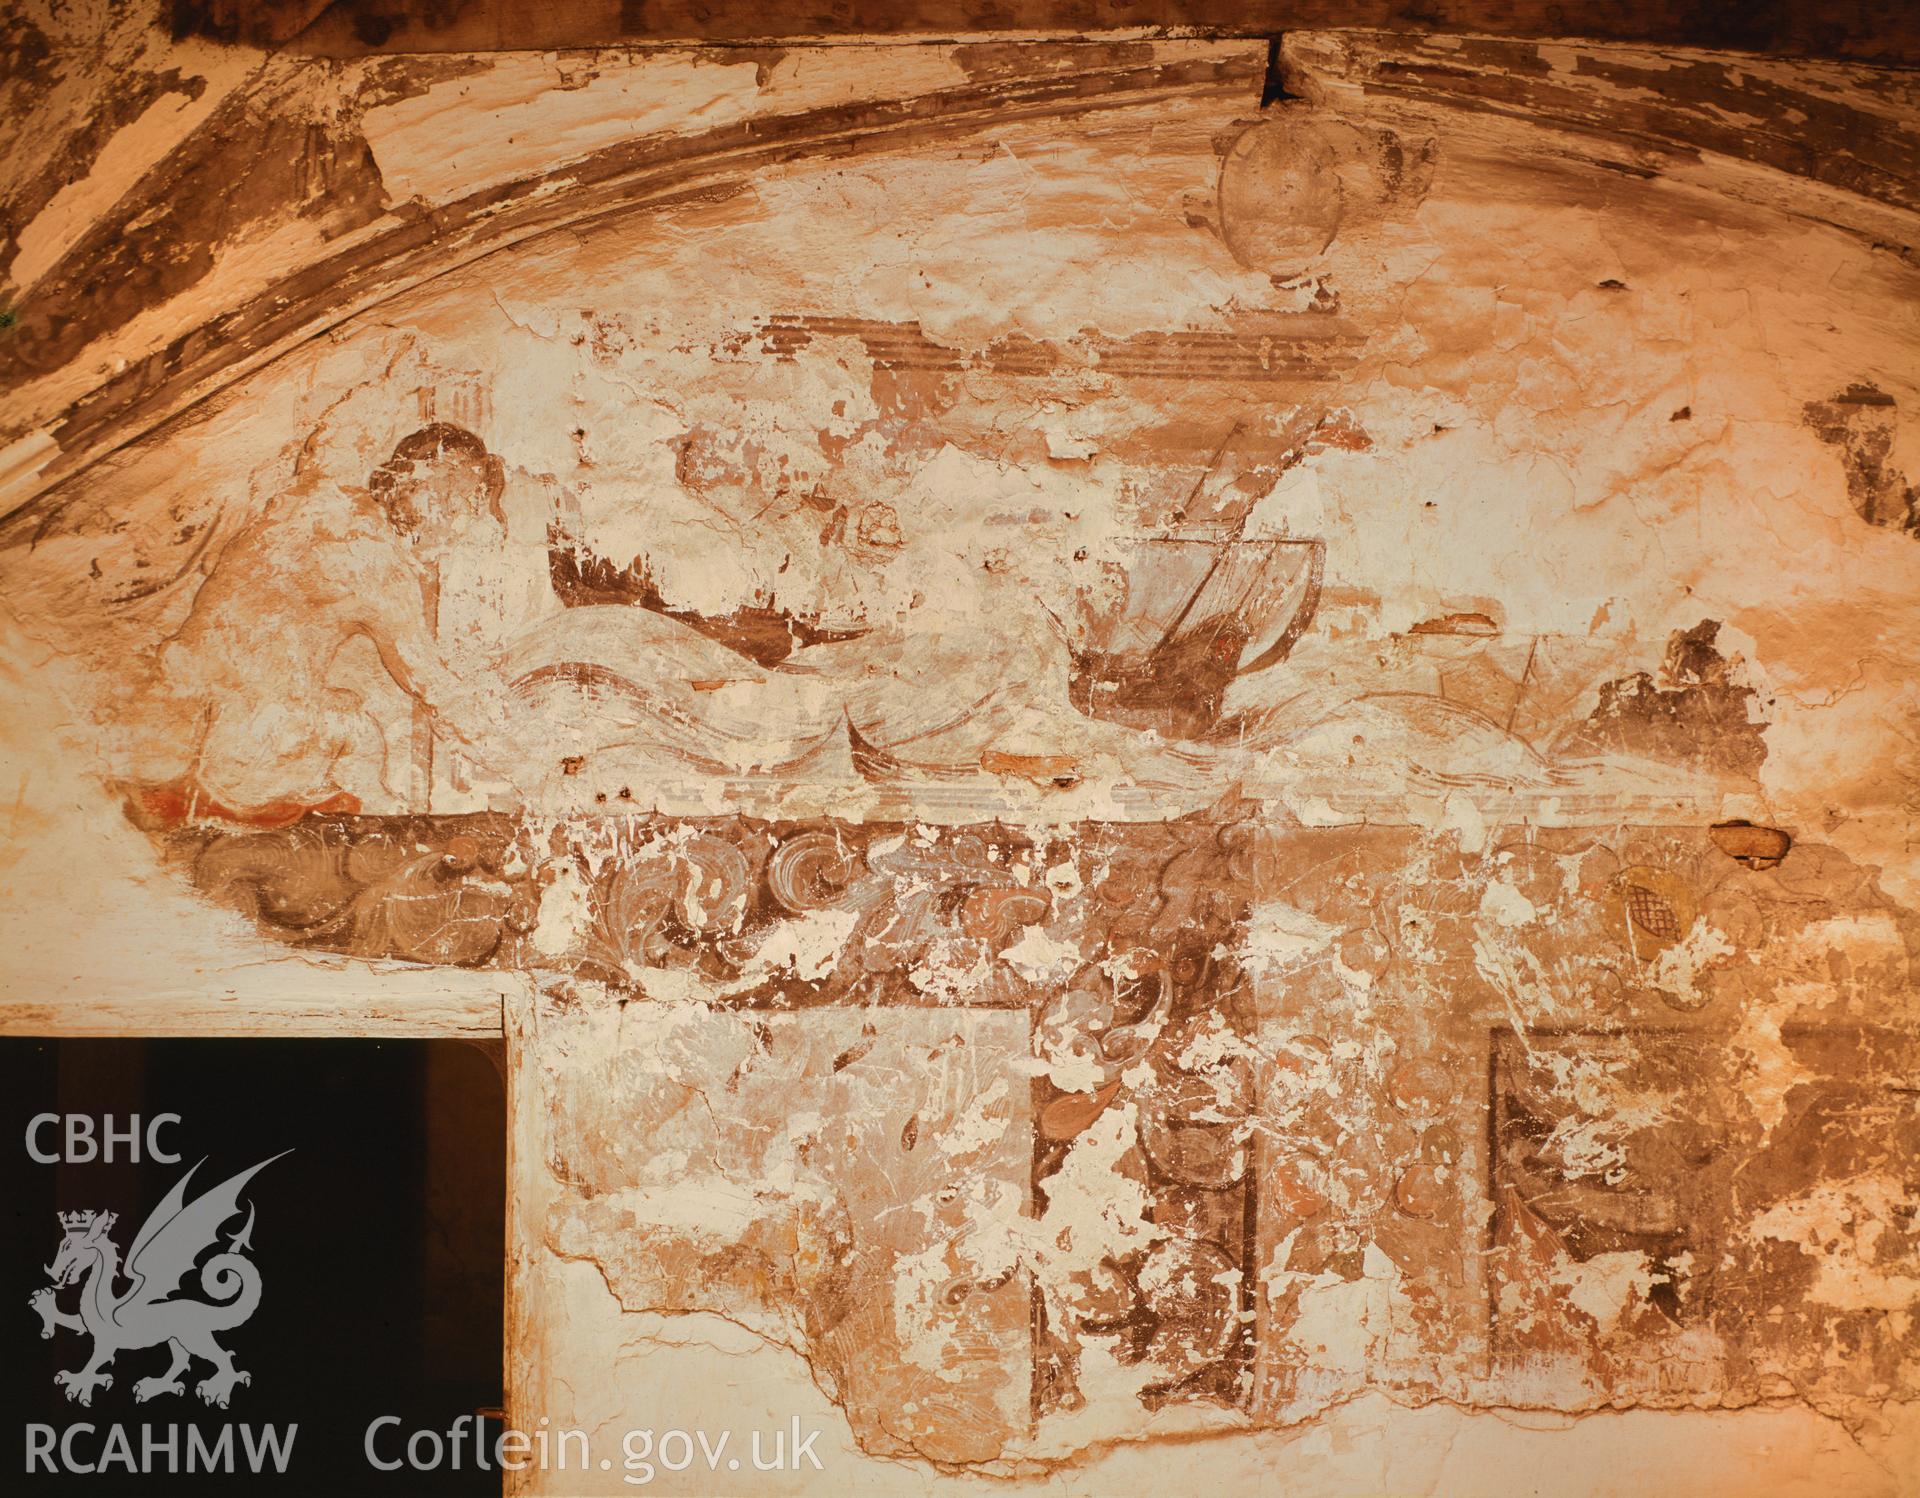 RCAHMW colour transparency showing  view of the wallpainting at Castell y Mynach, Pentyrch.